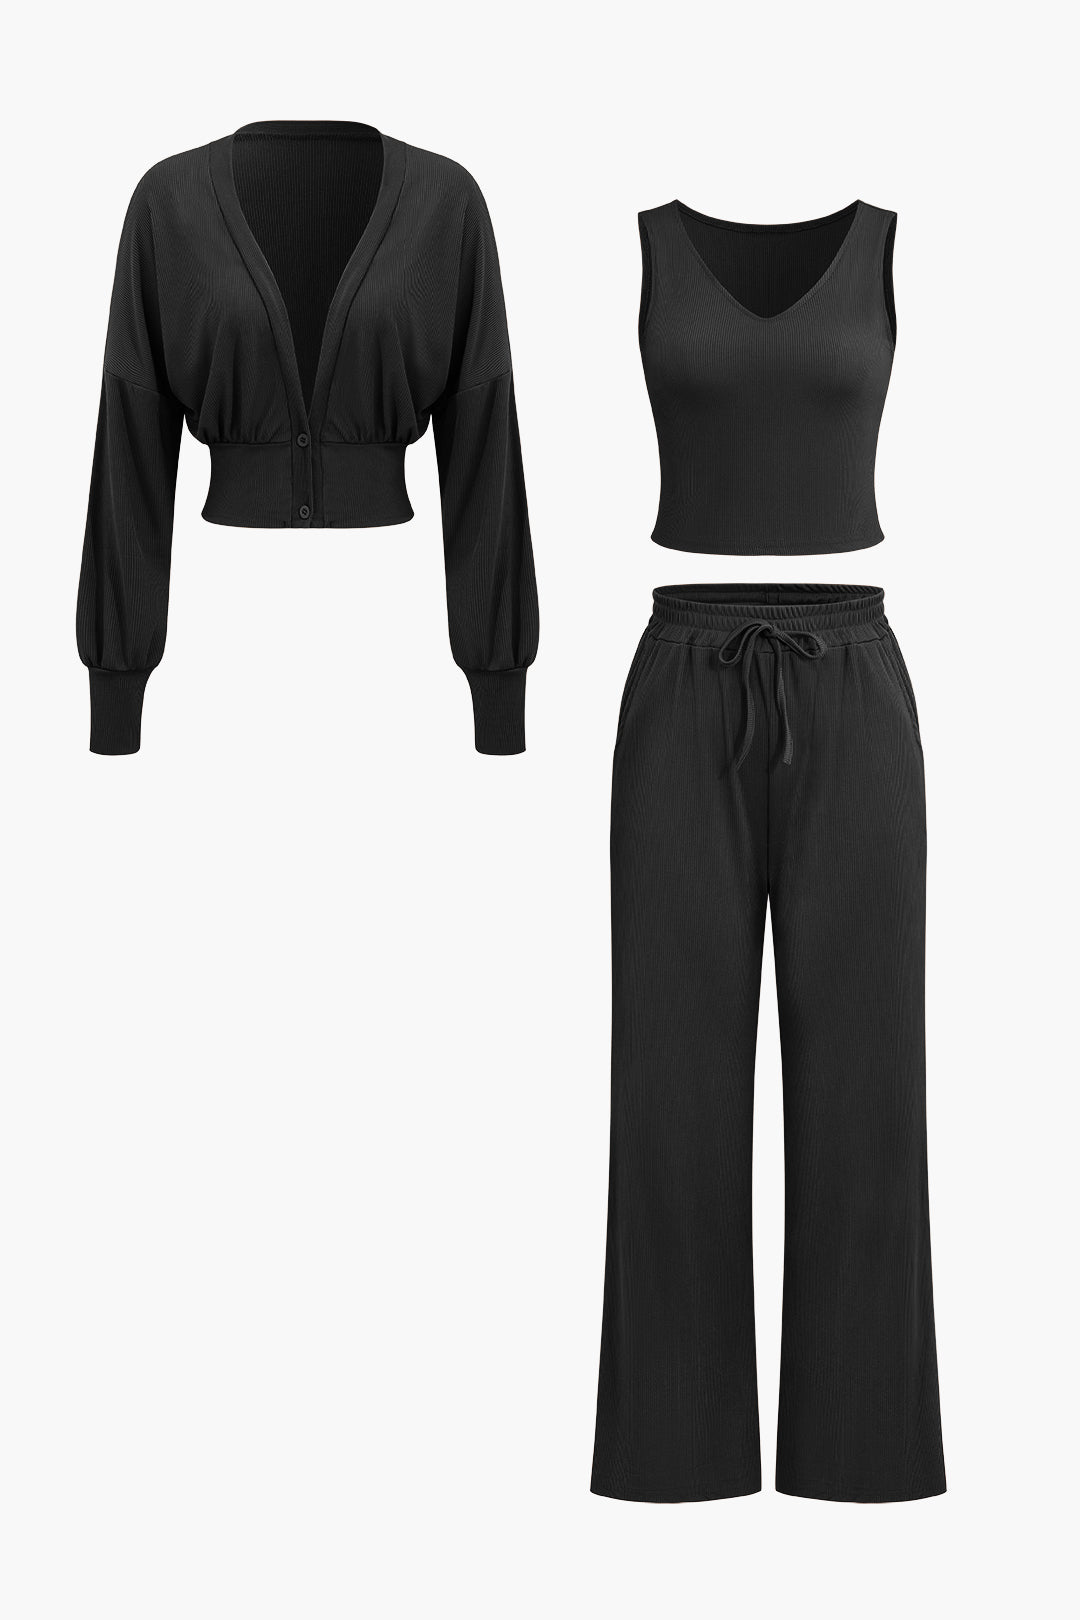 V-neck Tank Top And Button Up Long Sleeve Cardigan And High Waist Drawstring Straight Leg Pants 3pc Set